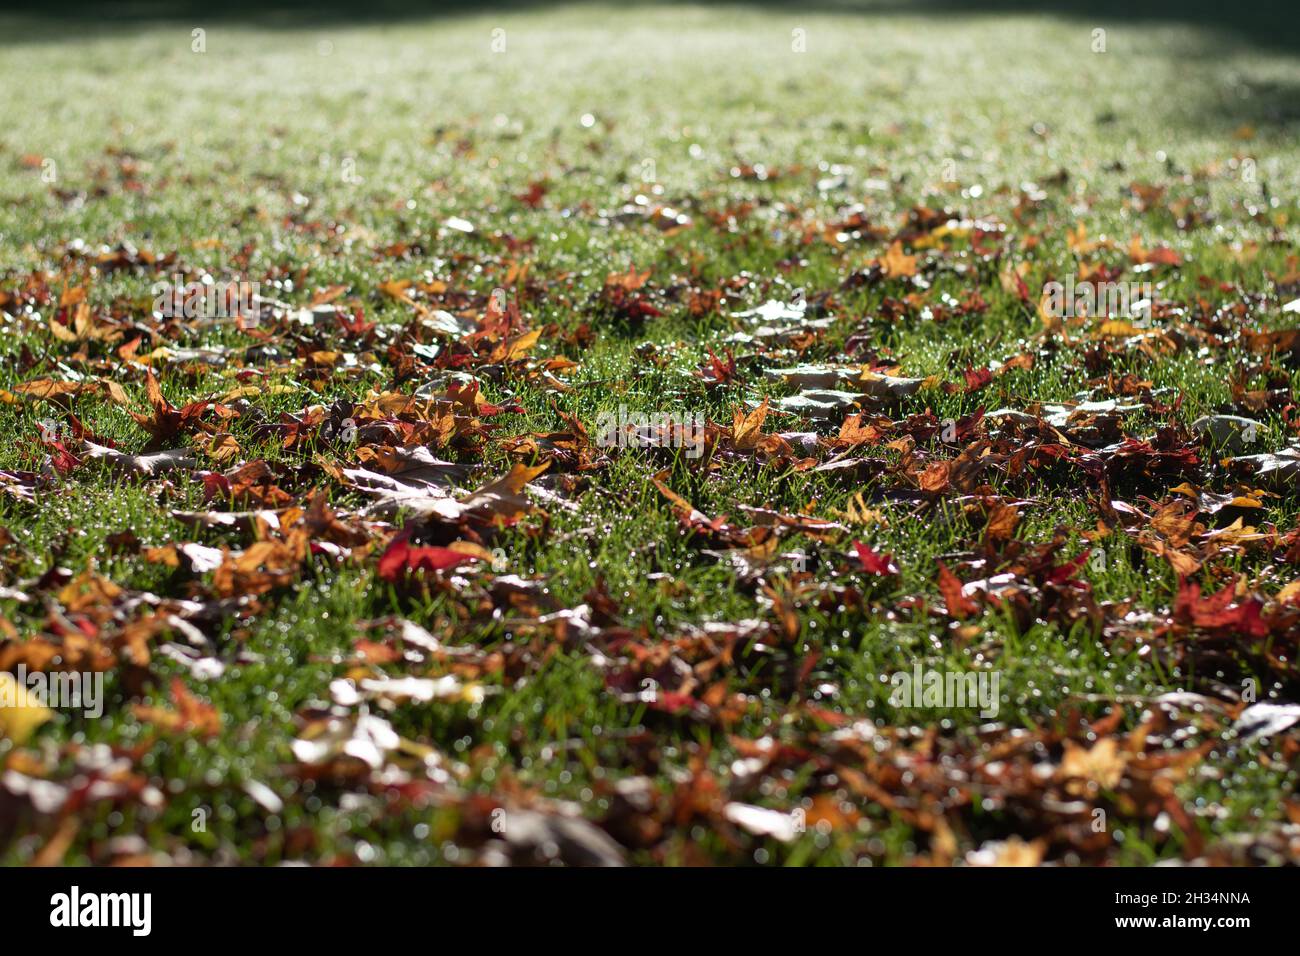 Autumn / Fall green grass lawn with fallen tree leaf leaves change of season Stock Photo